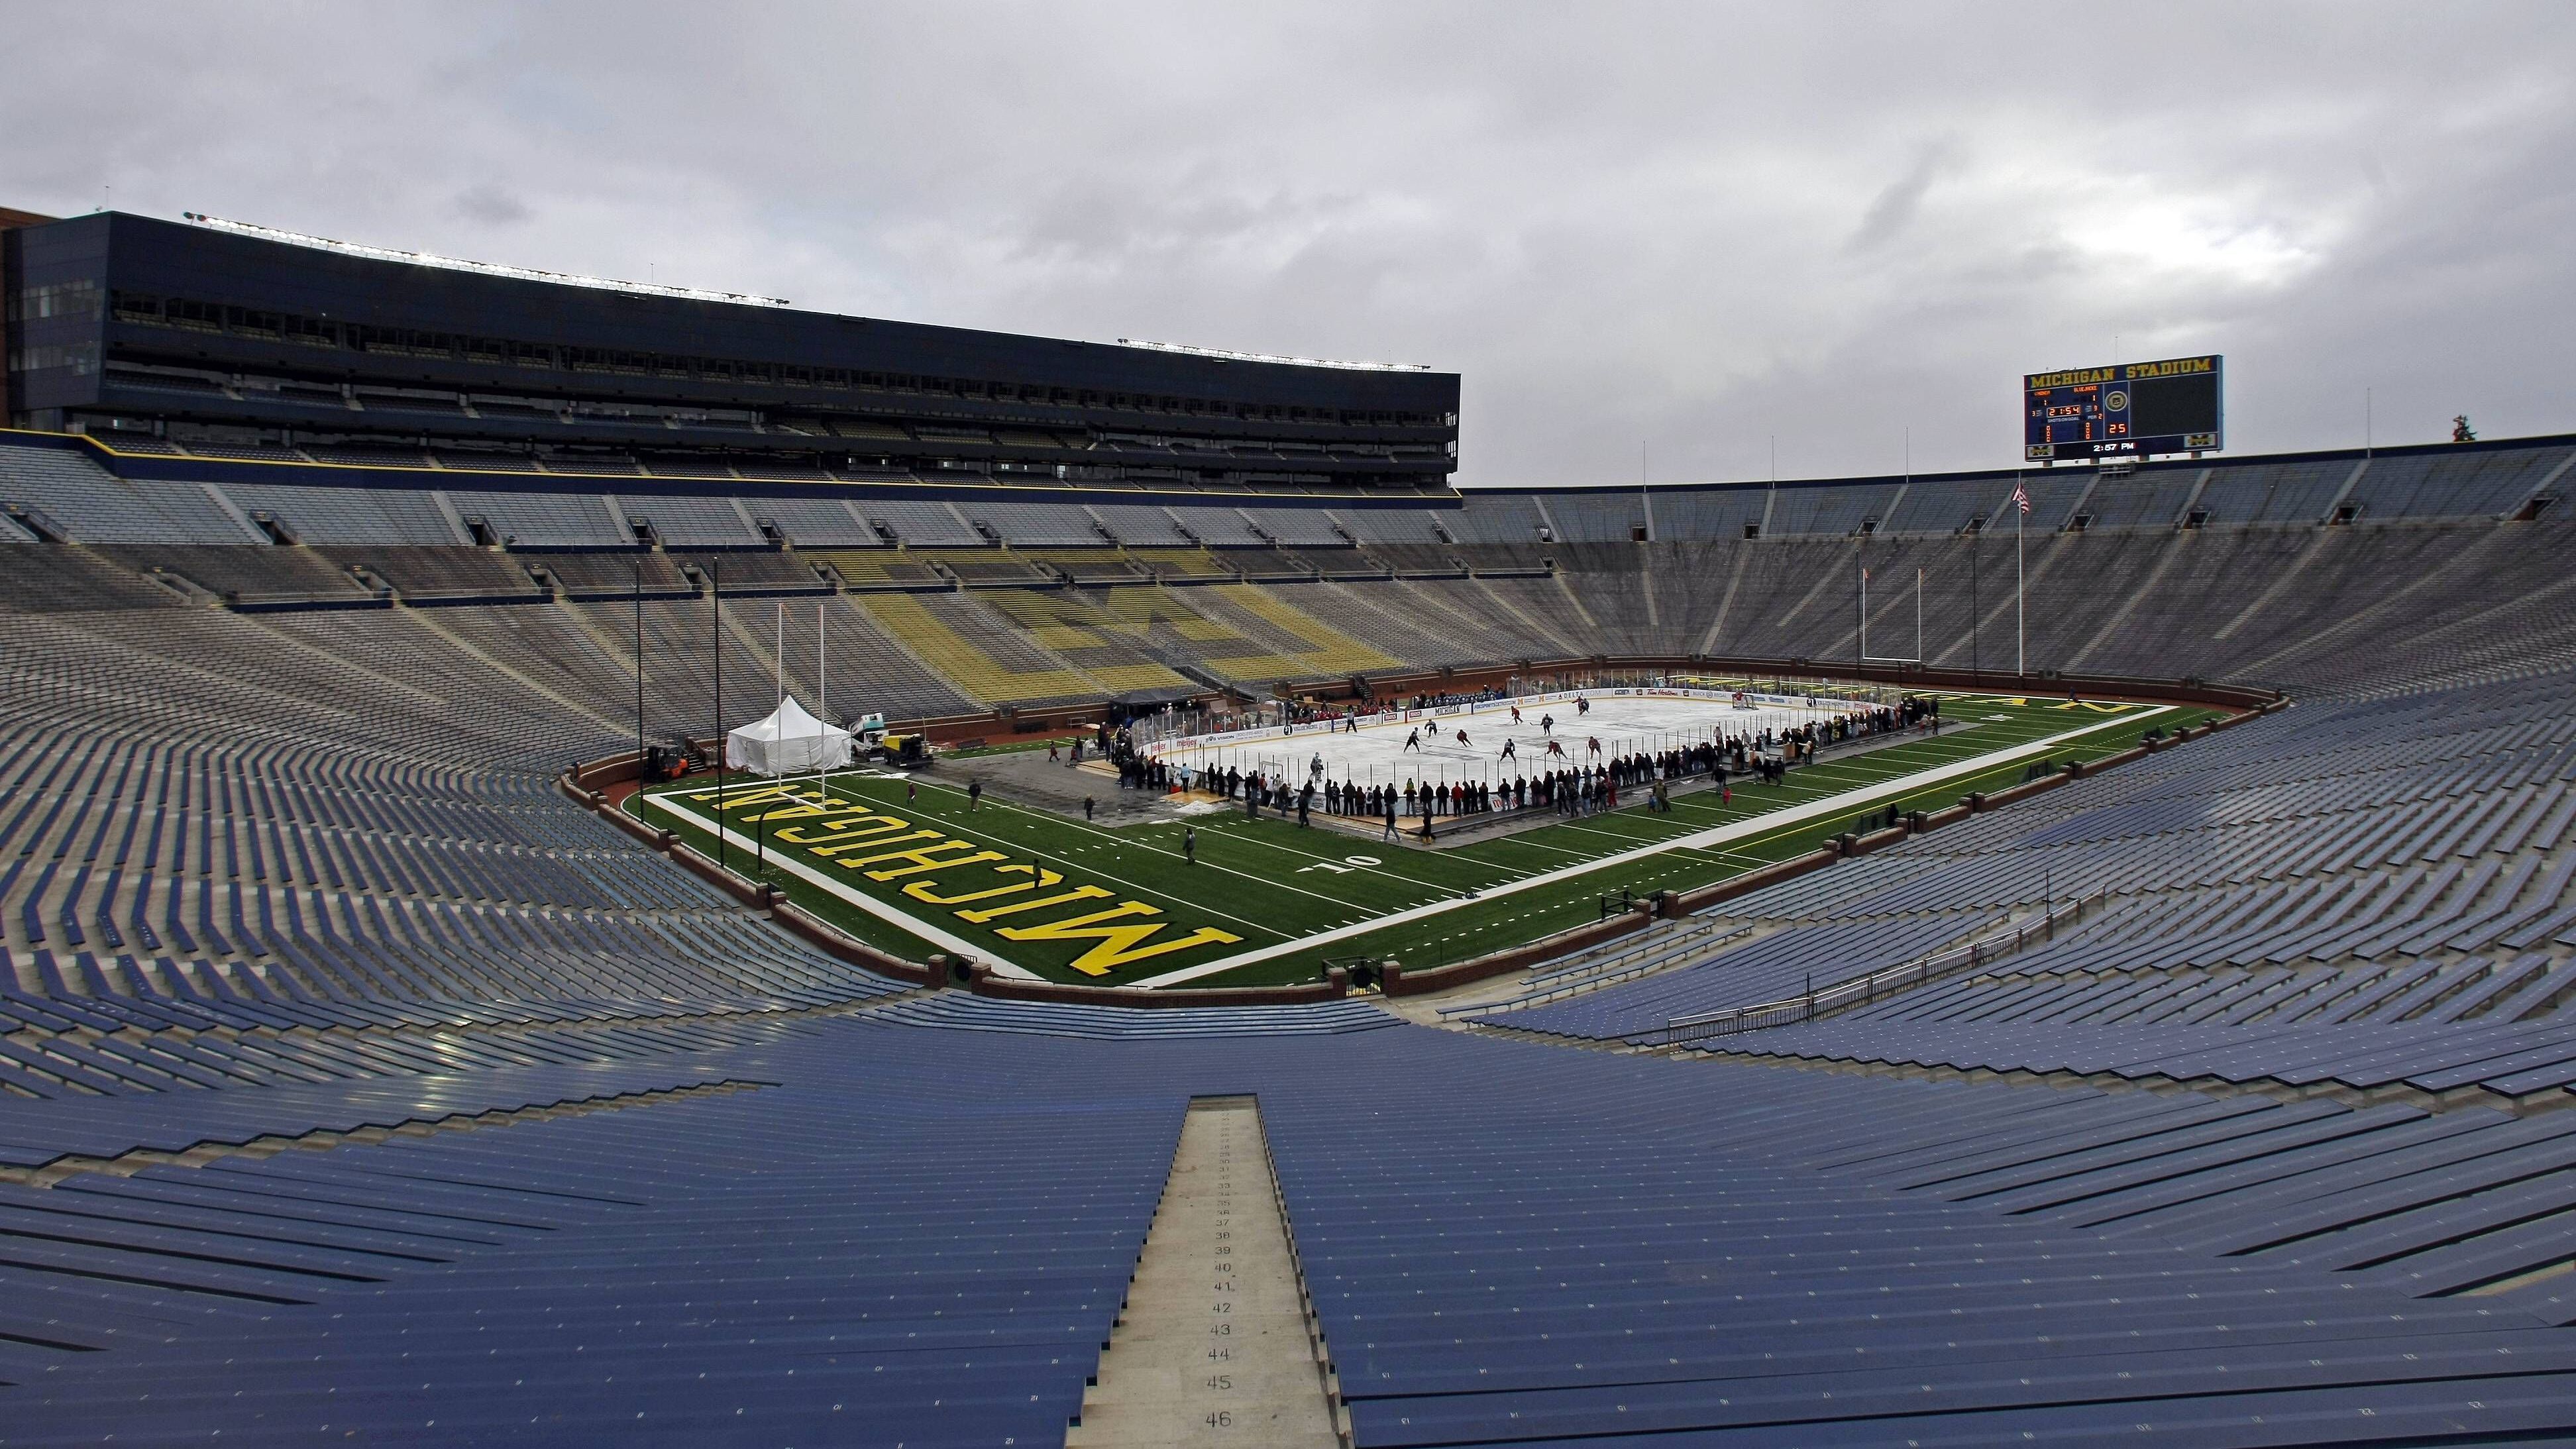 <strong>Platz 2: The Big Chill at the Big House (College-Eishockey)</strong><br><strong>Zuschauer:</strong> 104.173<br><strong>Begegnung:</strong> University of Michigan - Michigan State University 5:0<br><strong>Stadion:</strong> Michigan Stadium, Ann Arbor<br><strong>Datum:</strong> 11.12.2010